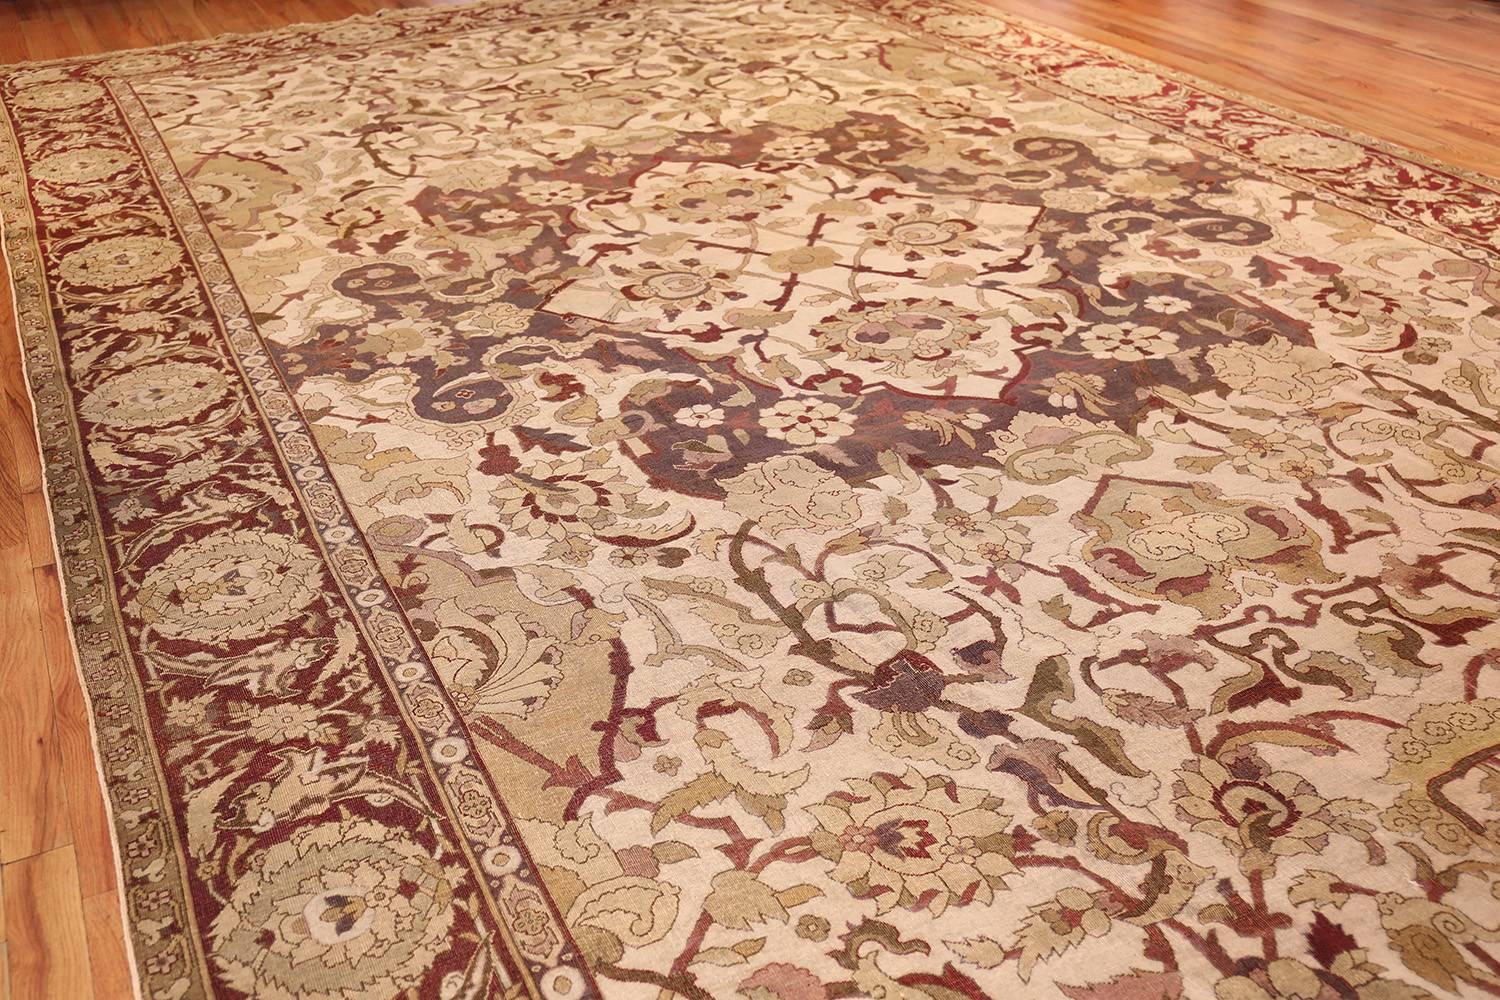 20th Century Large Antique Amritsar Indian Carpet. Size: 10 ft 10 in x 17 ft 6 in